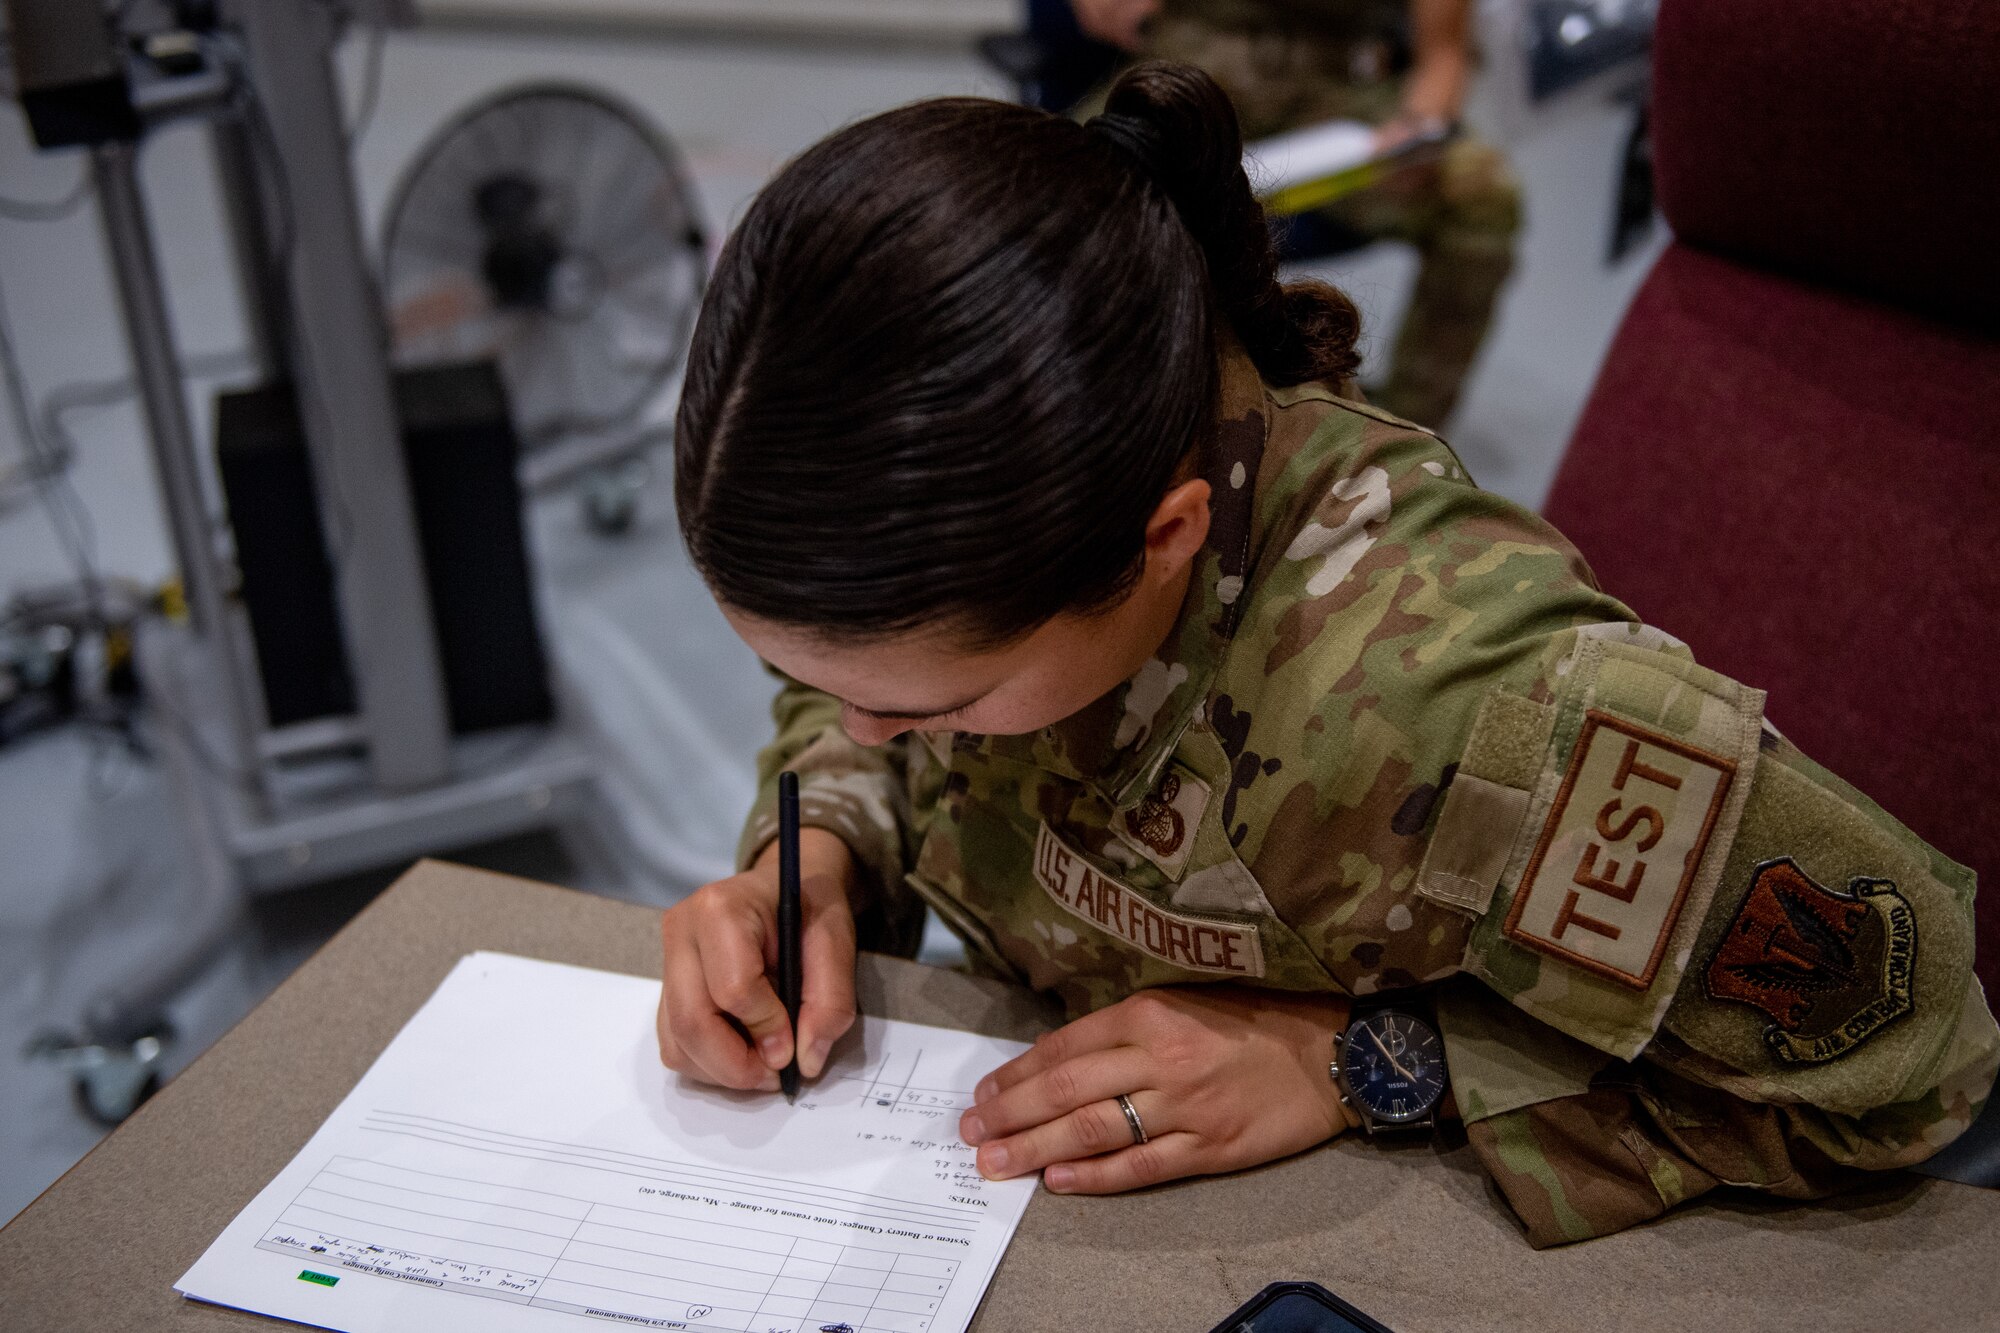 A U.S. Air Force Airman from the Air Force Life Cycle Management Center Human Systems Division documents test results at Moody Air Force Base, Georgia, Aug. 28, 2023. The new system design was developed to allow female pilots more comfort while flying. (U.S. Air Force photo by Senior Airman Courtney Sebastianelli)